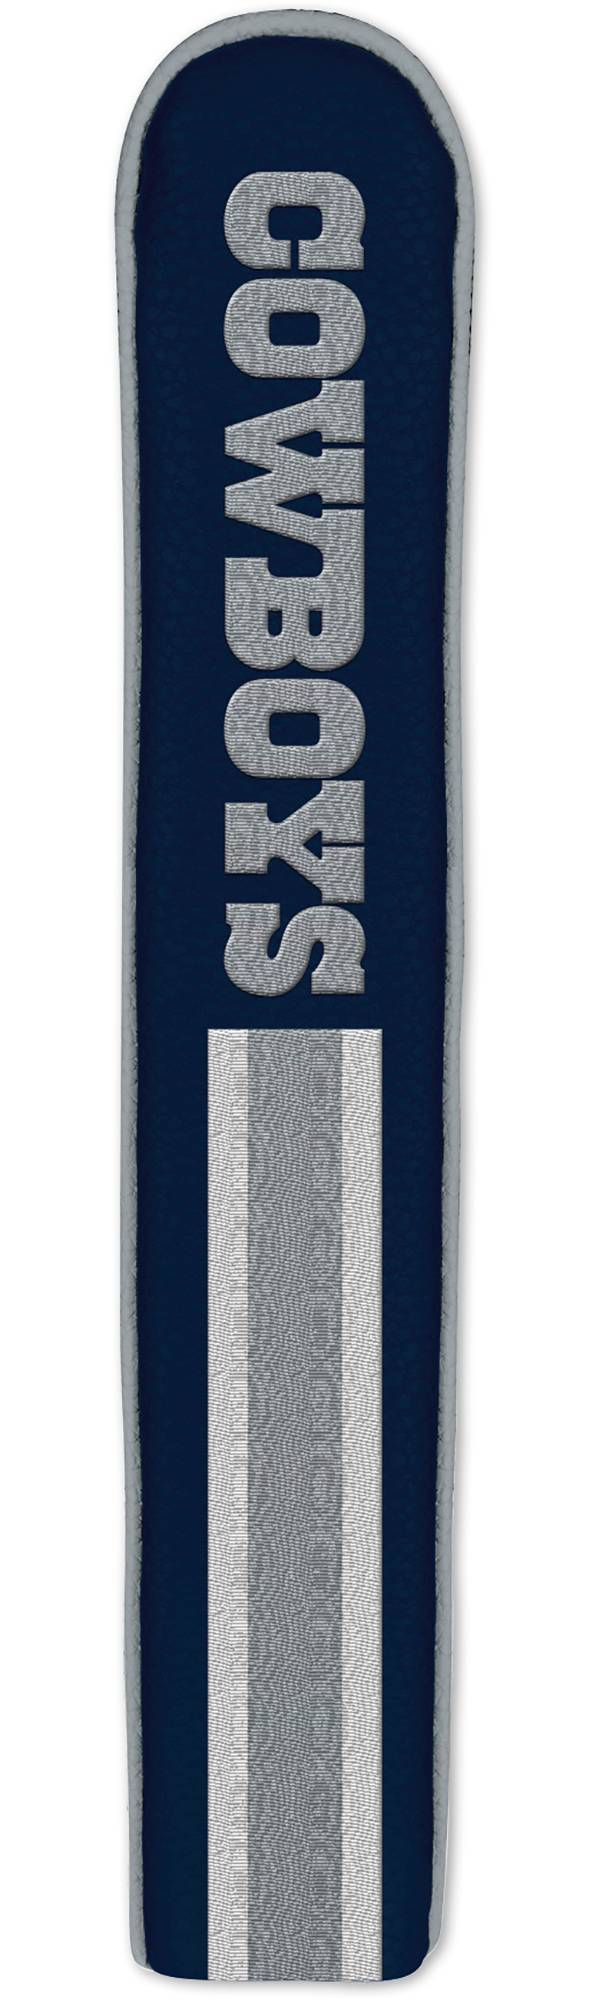 Team Effort Dallas Cowboys Alignment Stick Cover product image